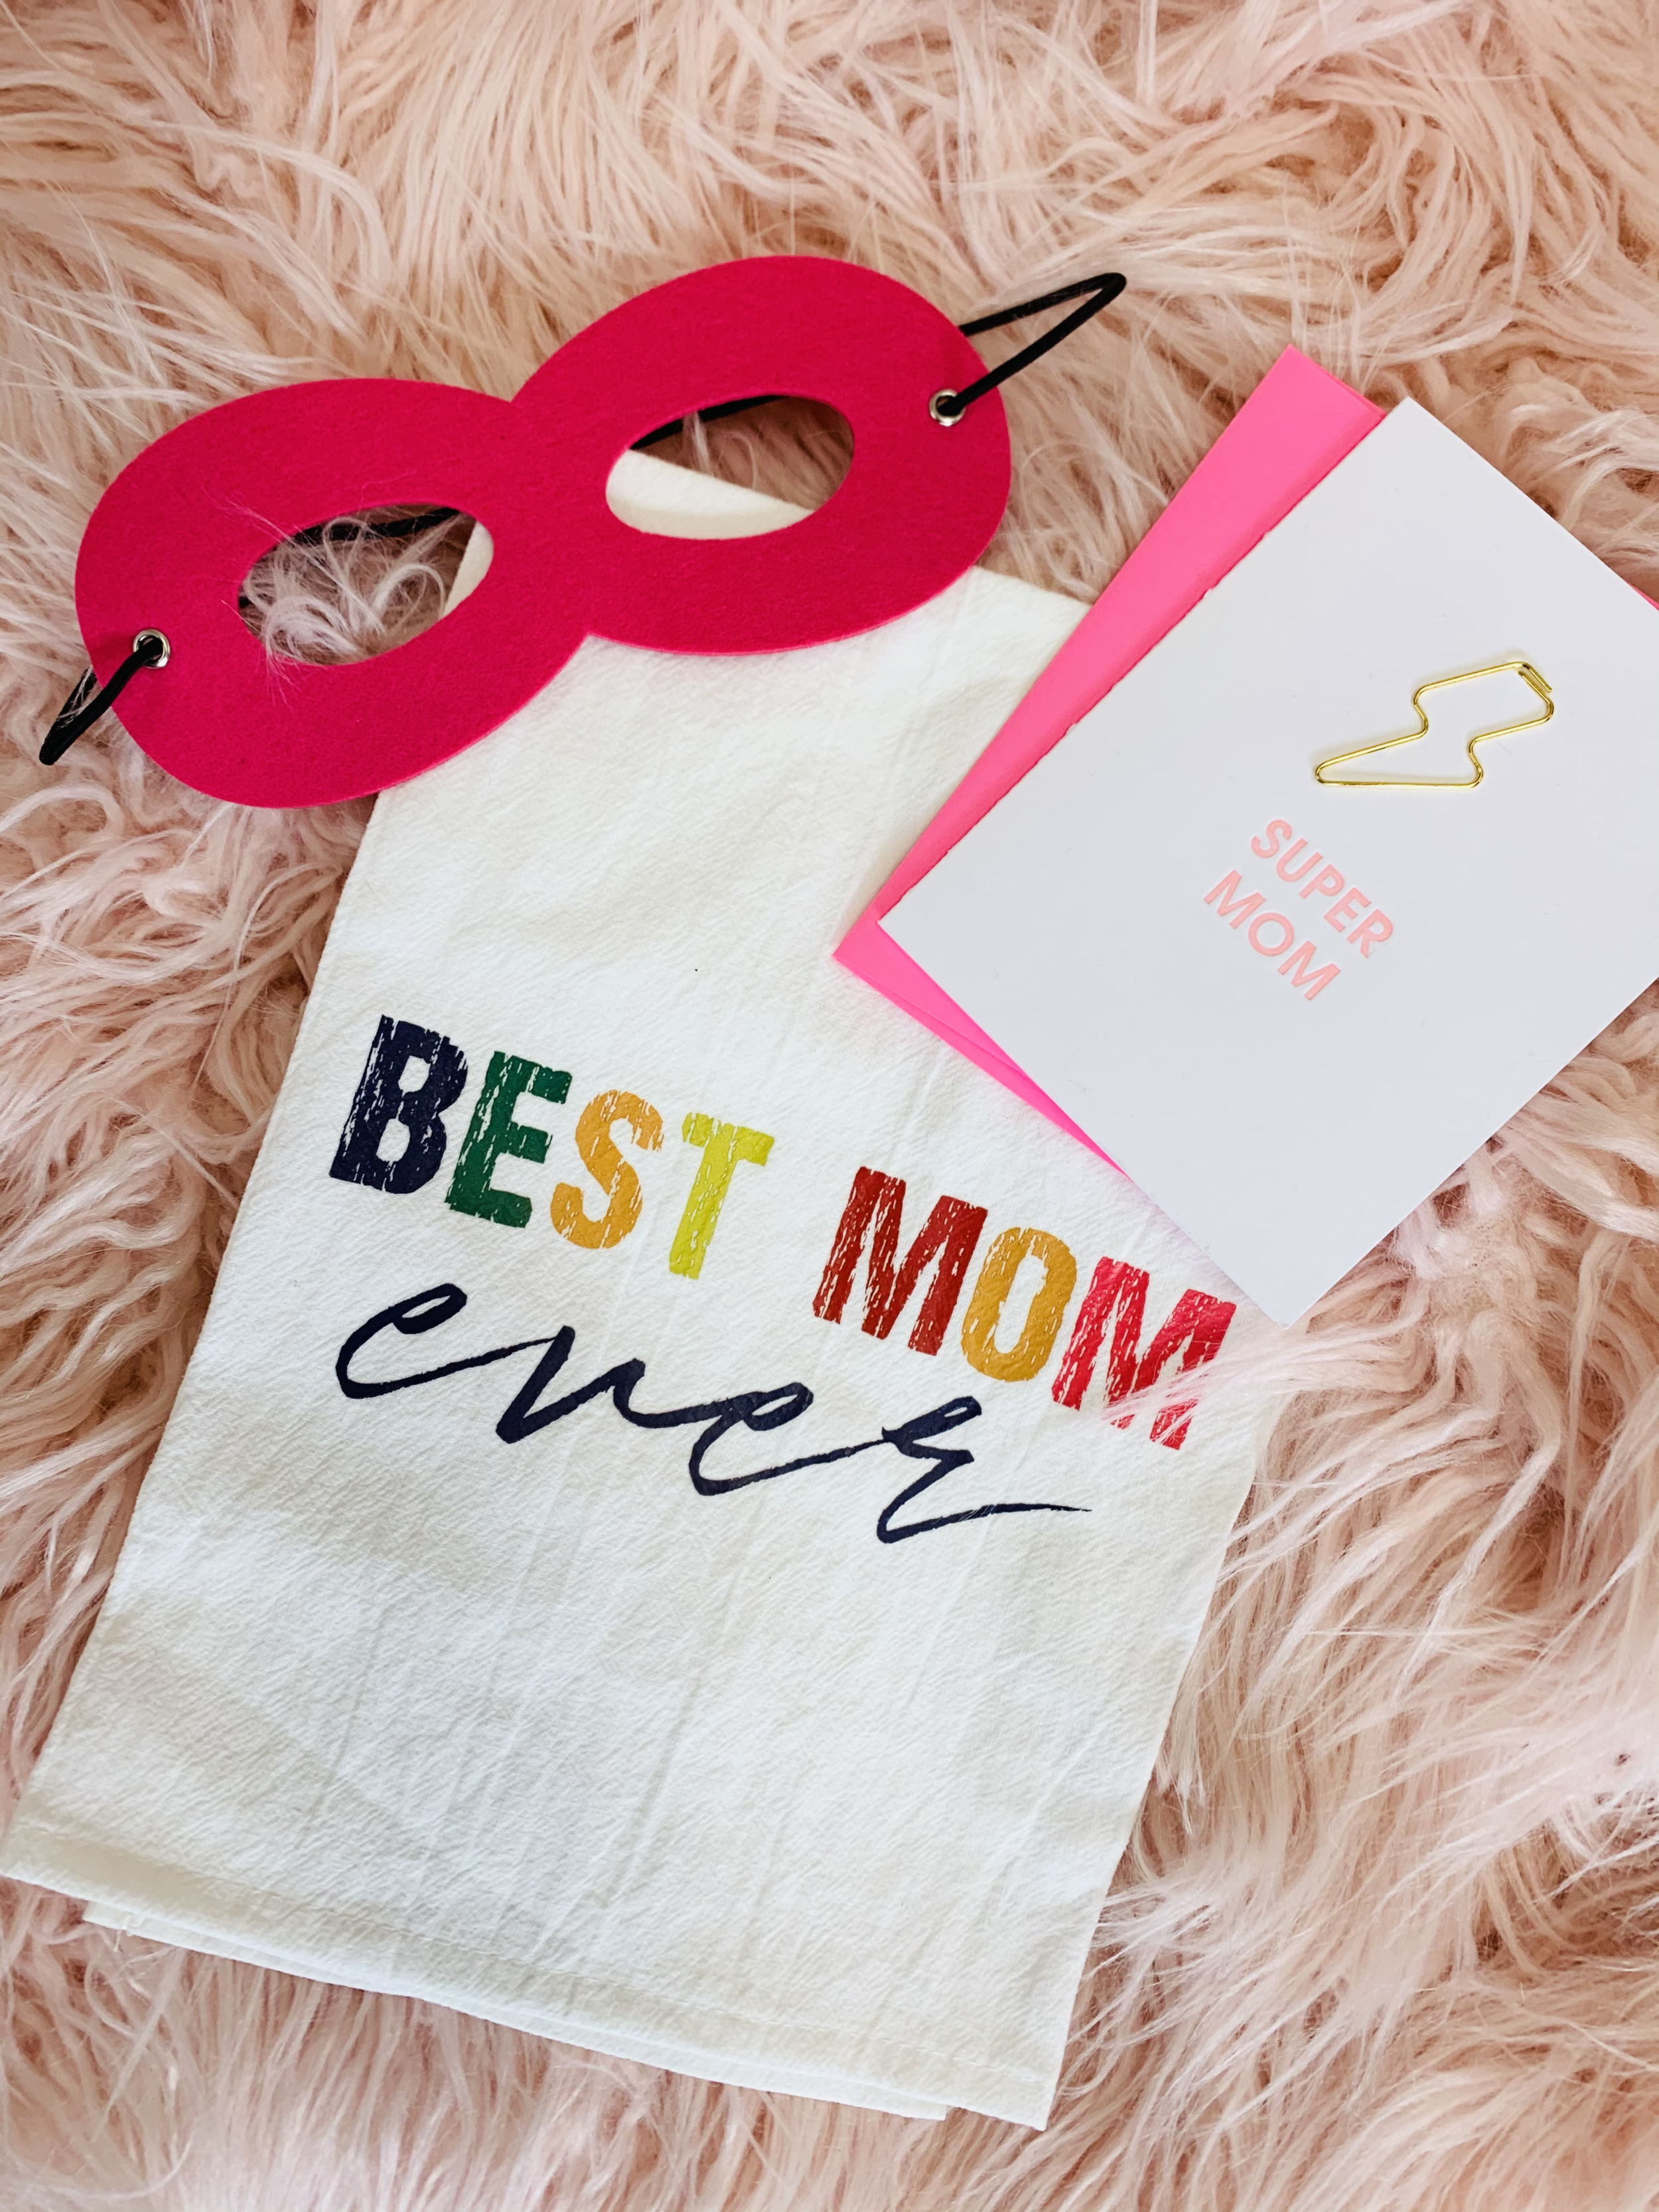 Mother's Day Supermom Gift Basket Set, Way To Celebrate 